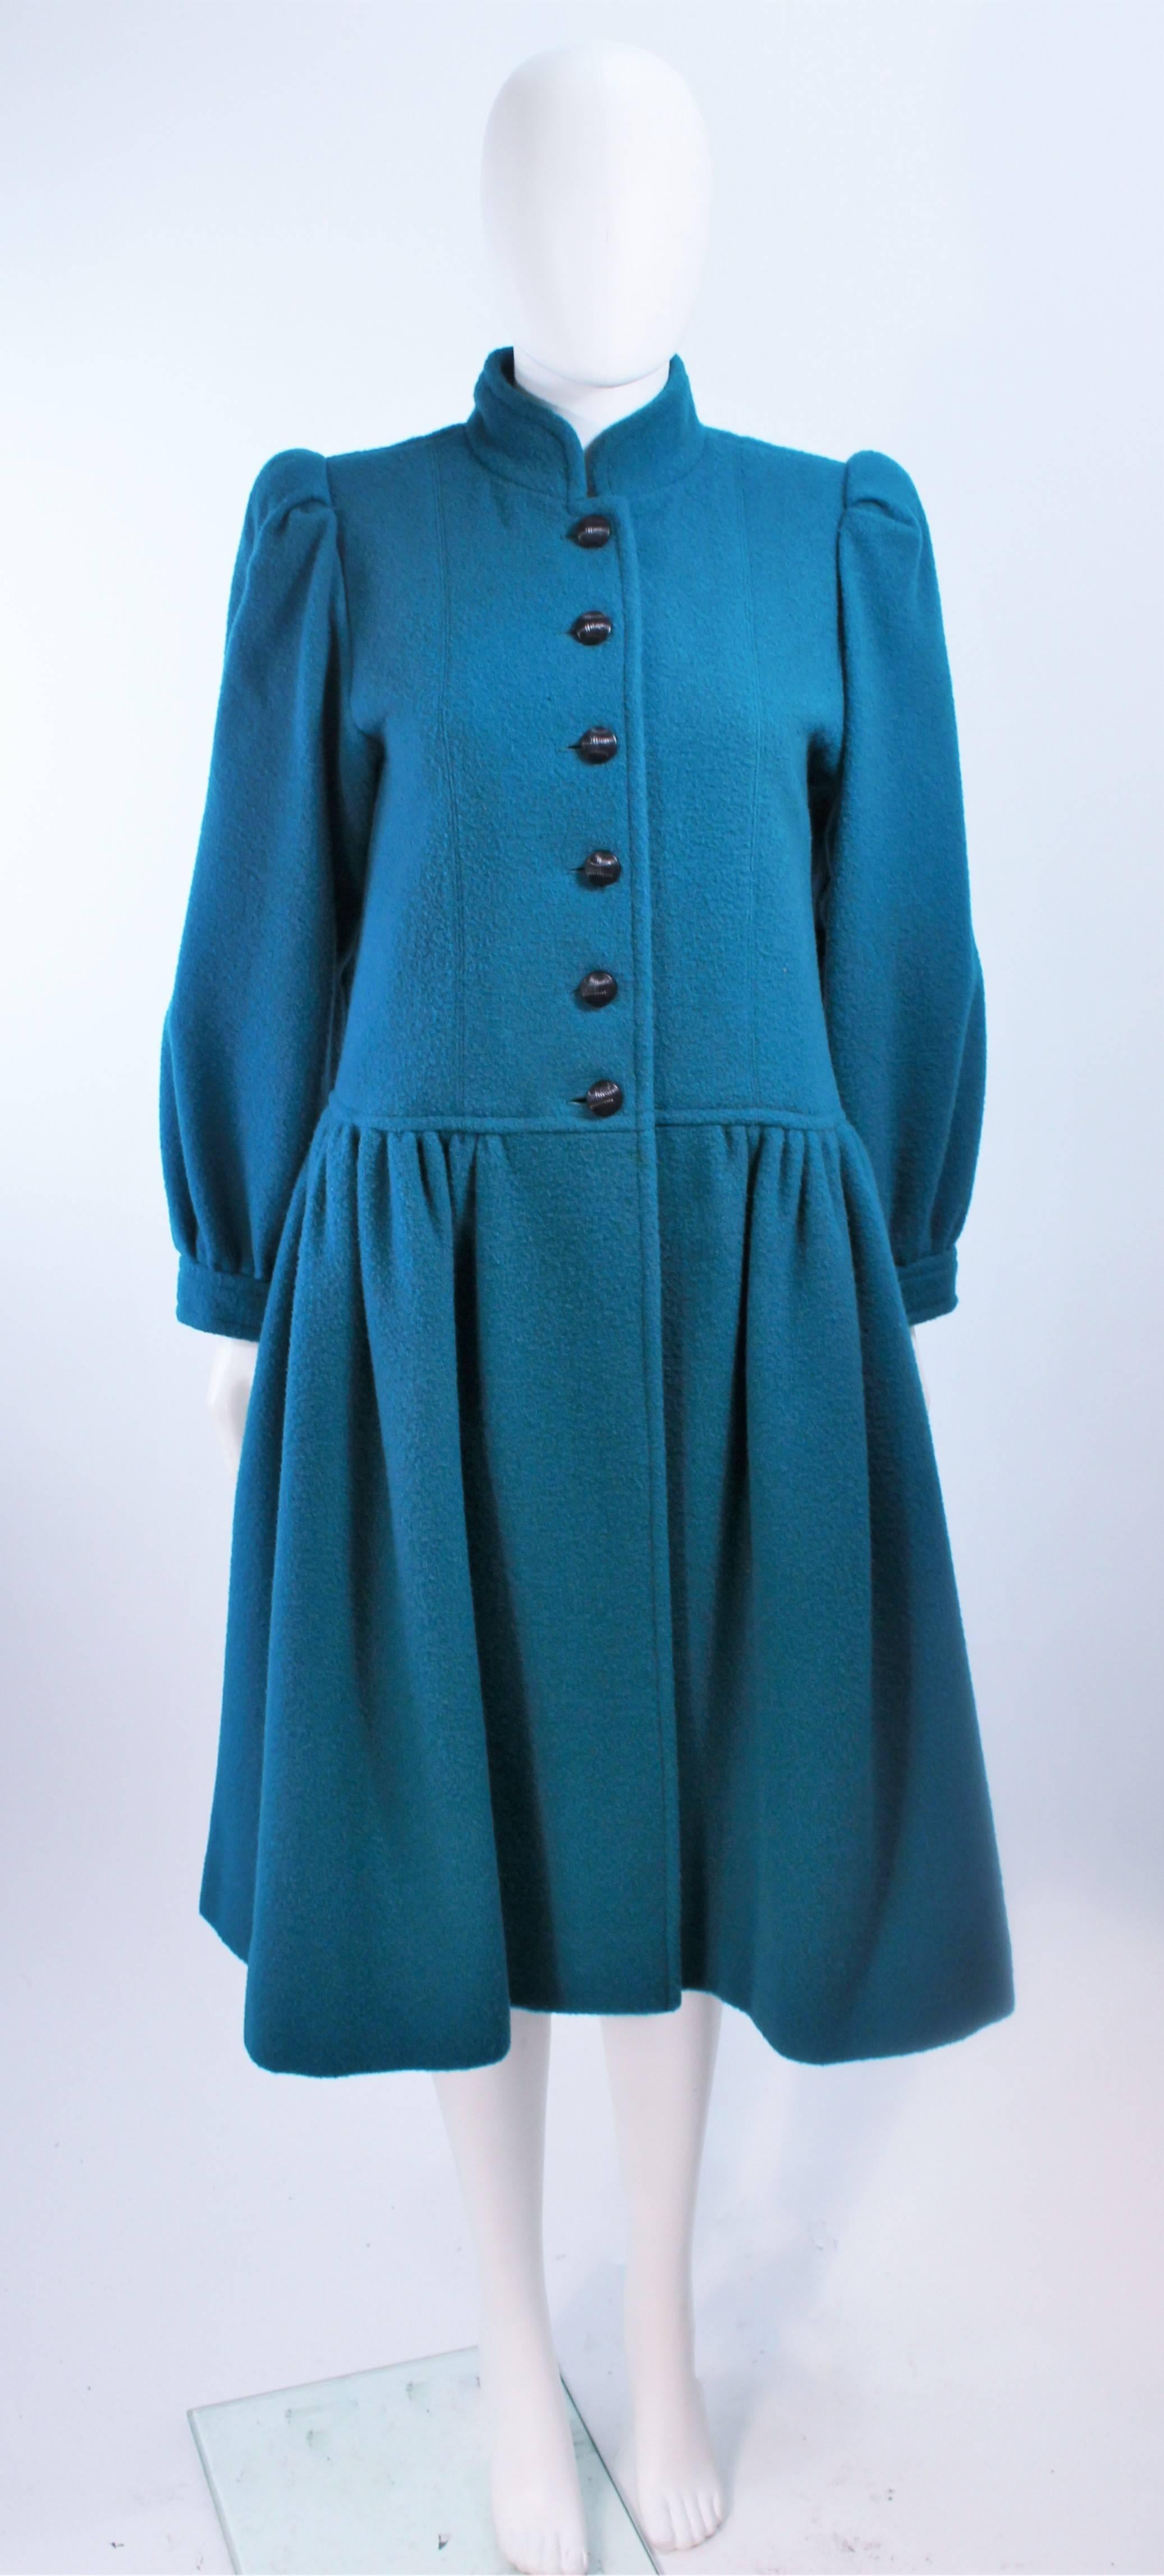 This Yves Saint Laurent design is composed of a turquoise wool. Features a gathered sleeve and center front button closures. In excellent vintage condition.

**Please cross-reference measurements for personal accuracy. Size in description box is